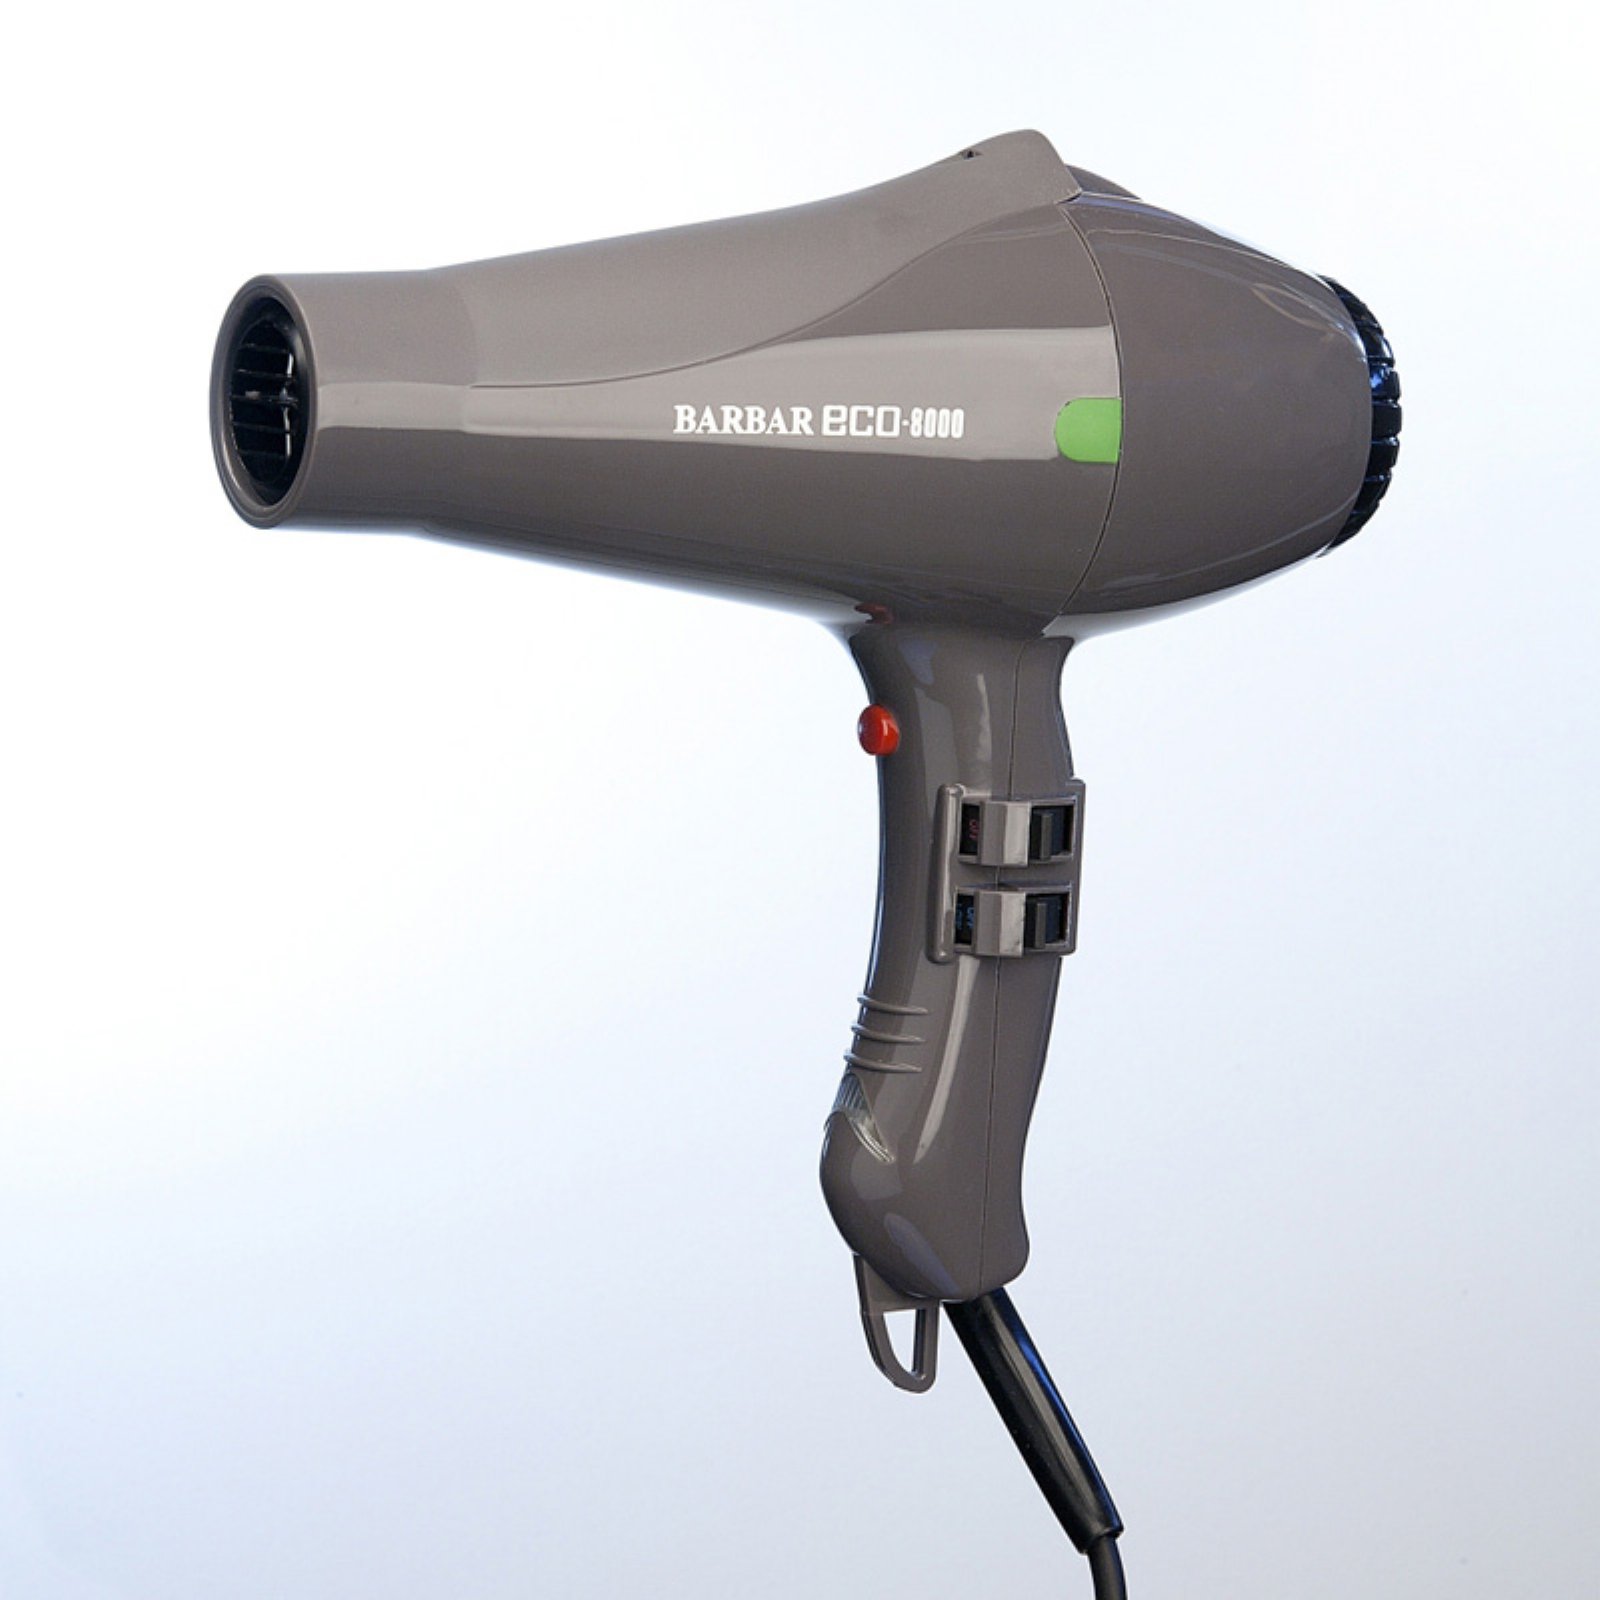 Barbar ECO 8000 Eco-Friendly Blow Dryer - image 1 of 4